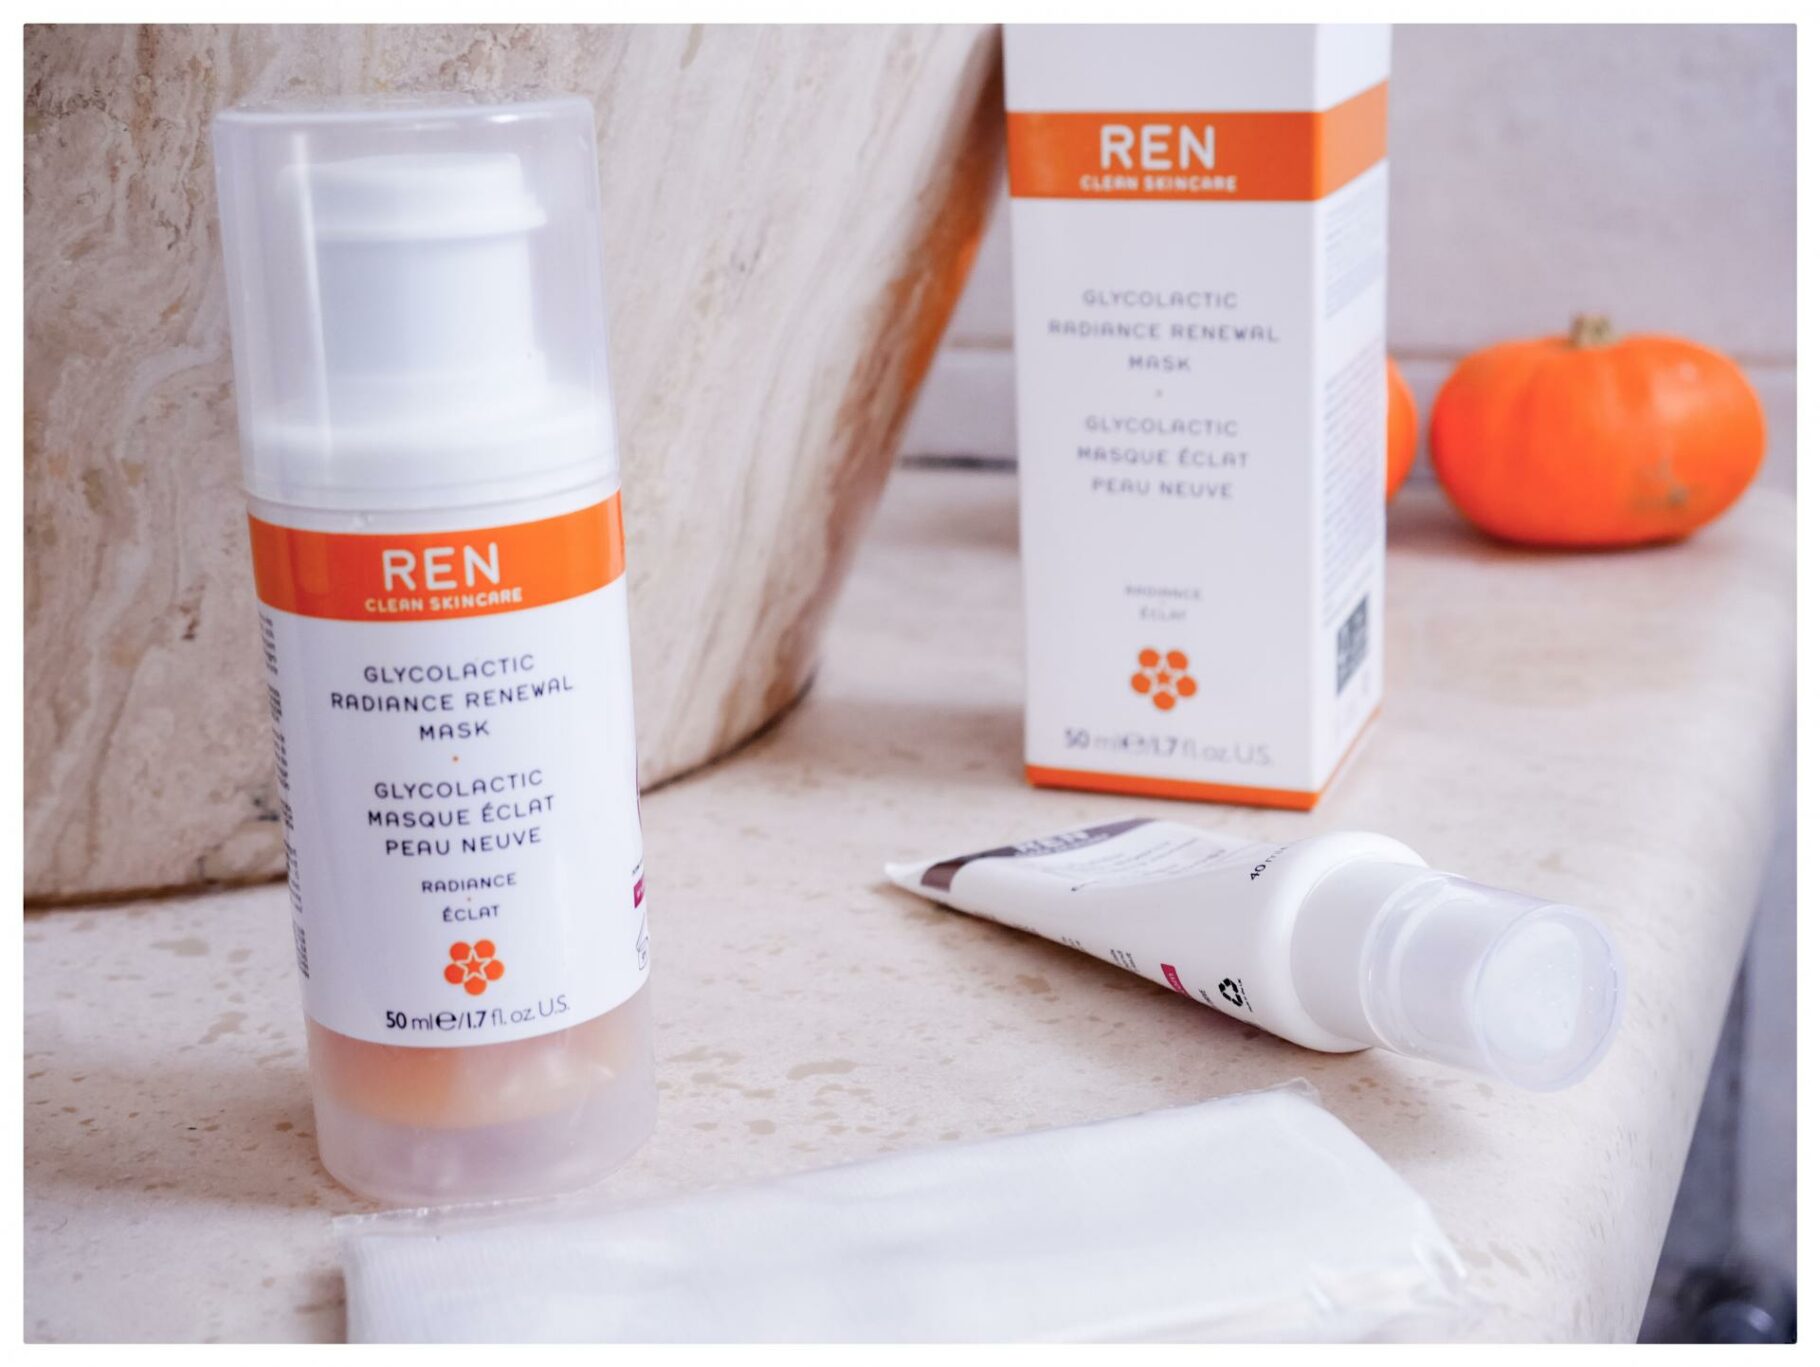 Ren Skincare Glycol Lactic Radiance Renewal Mask Review